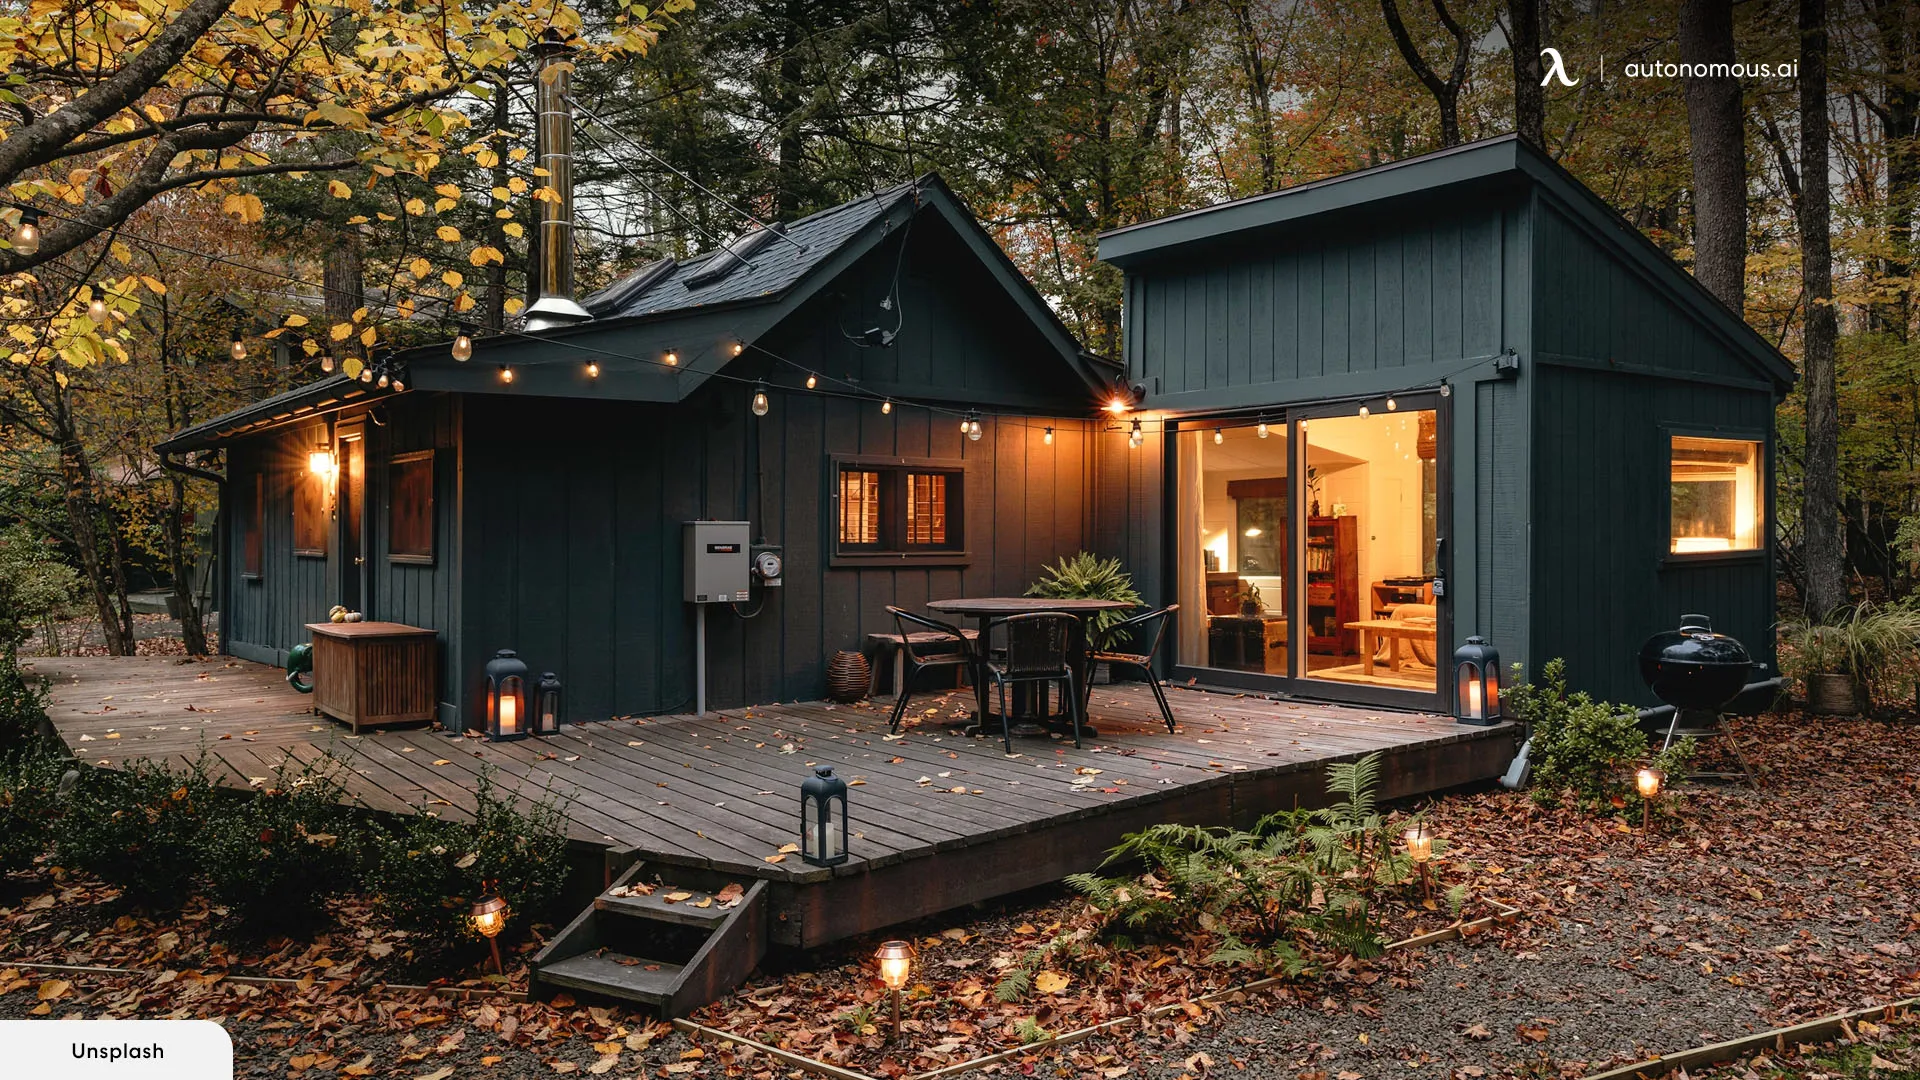 What considerations are there for building a backyard tiny home?